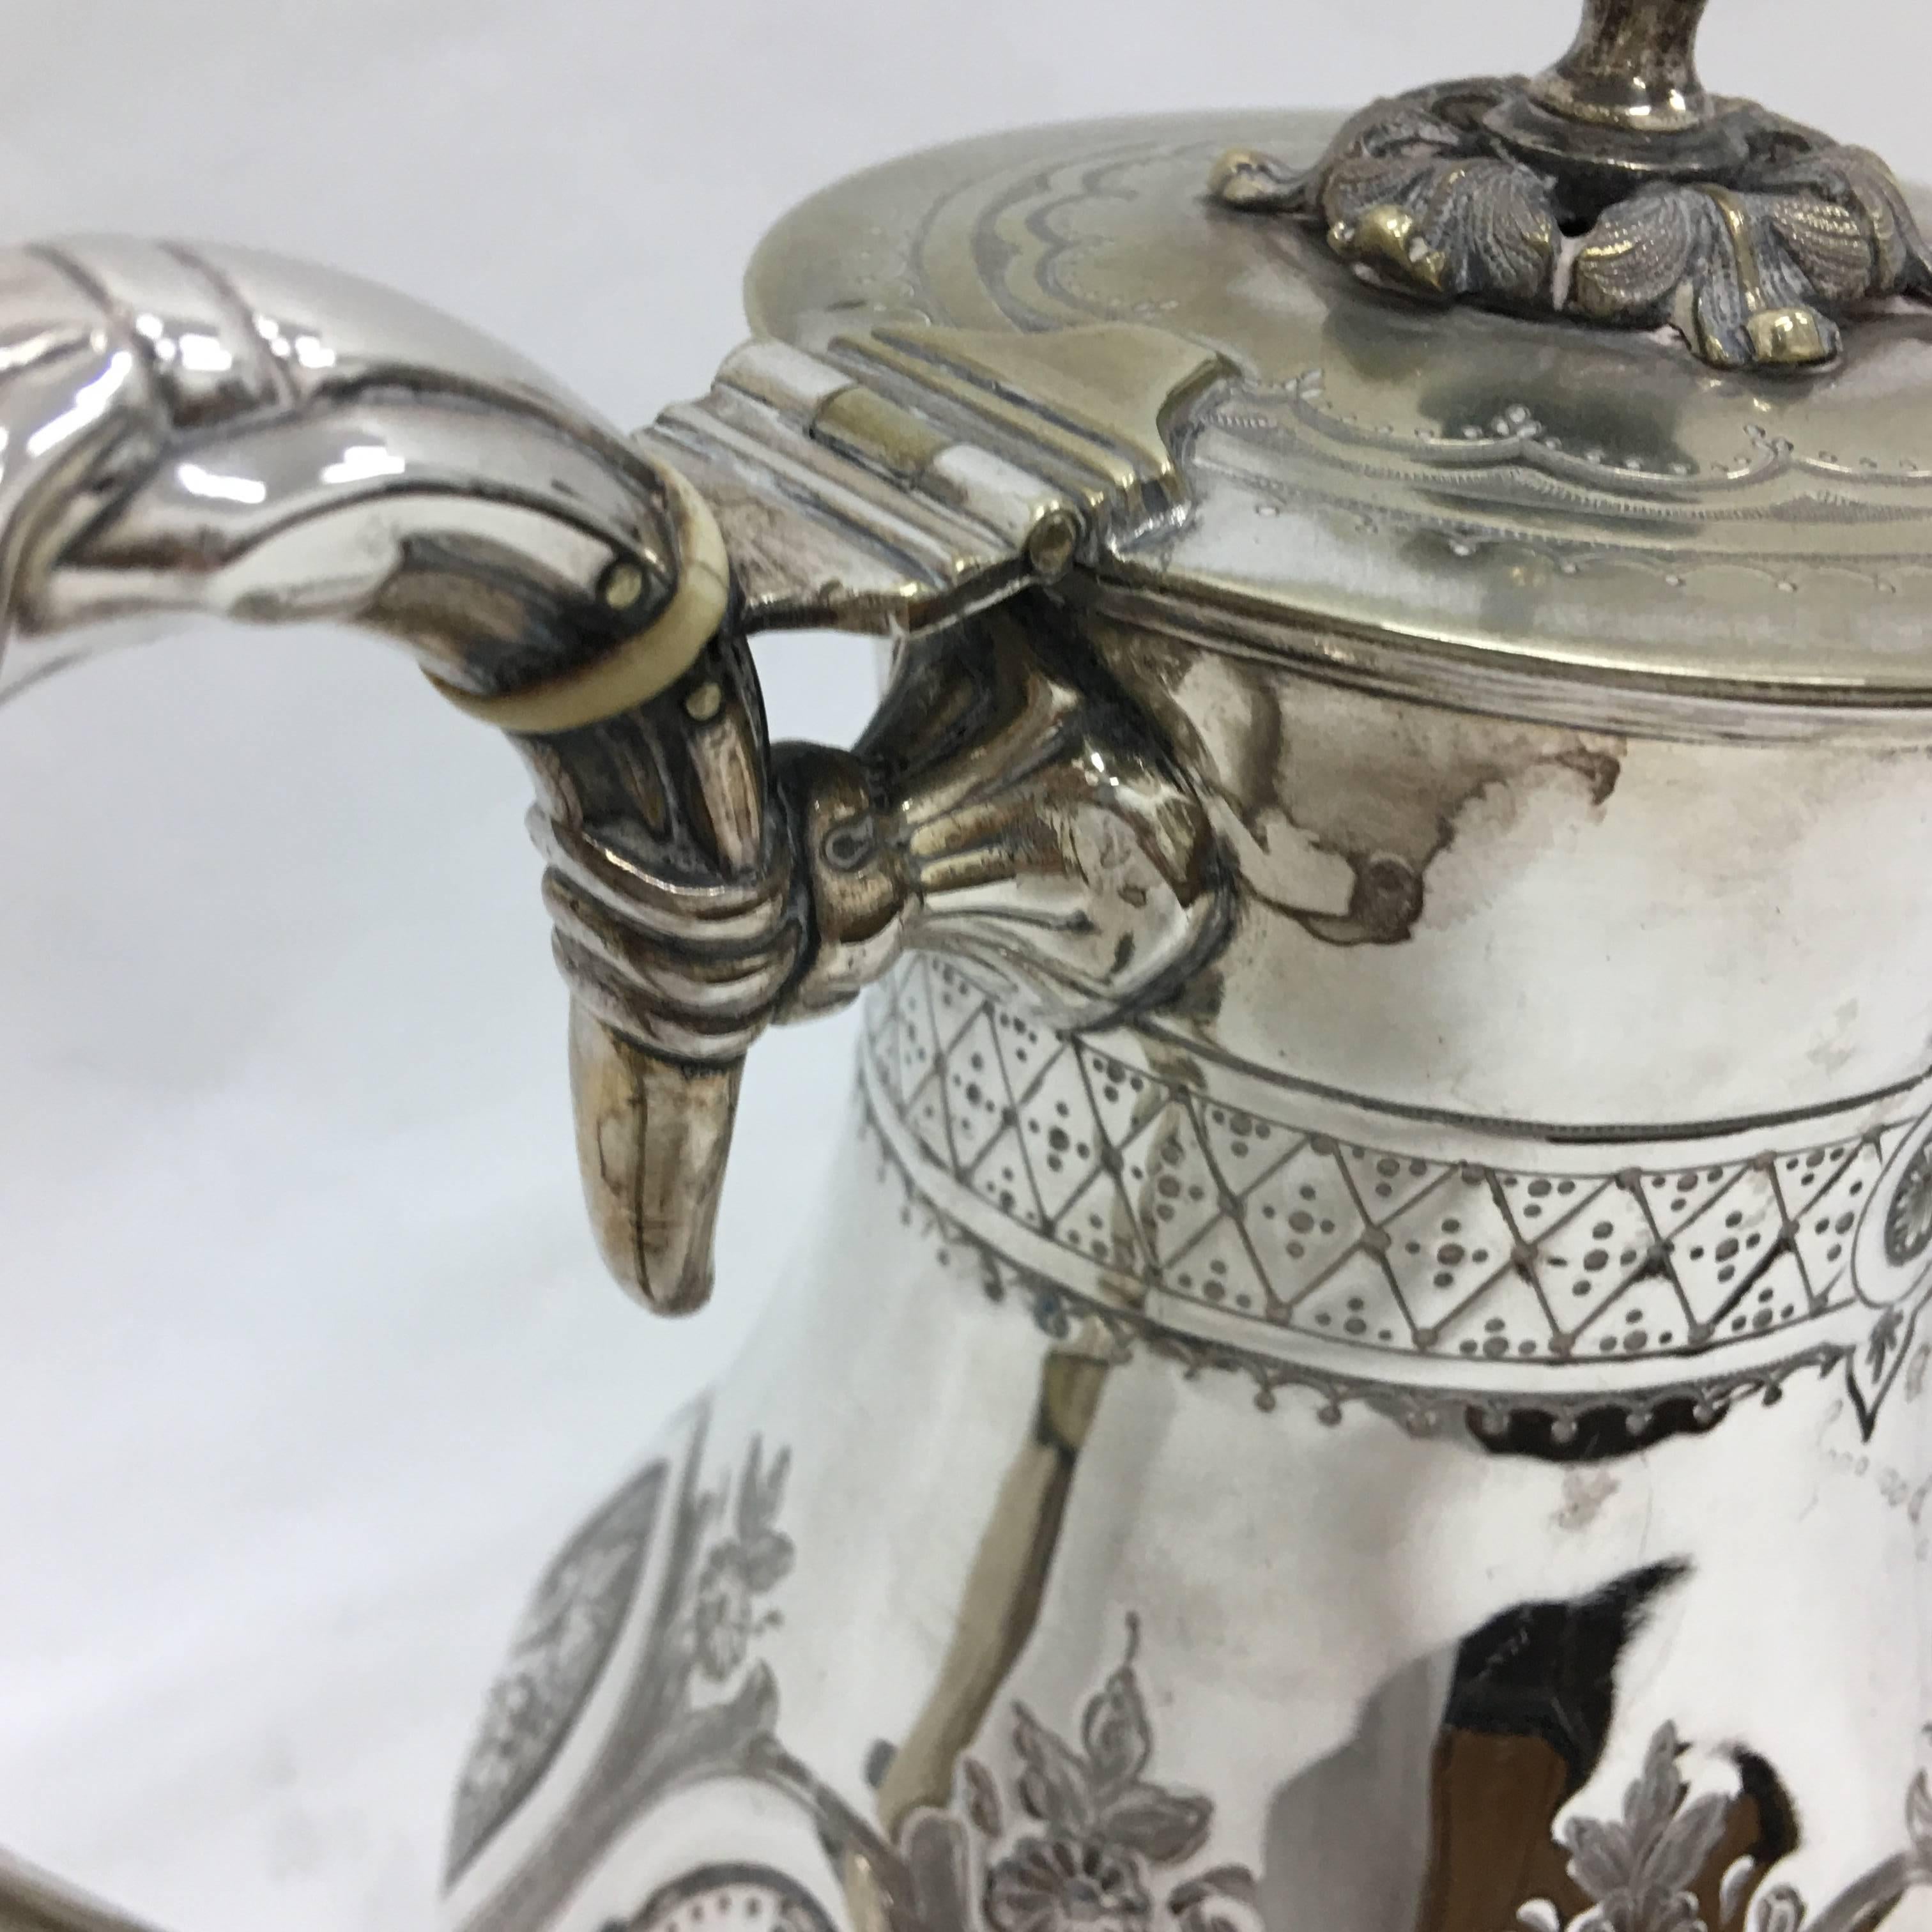 Late Victorian Victorian Engraved Silver Plated British Tea Set by Wilkinson 1870